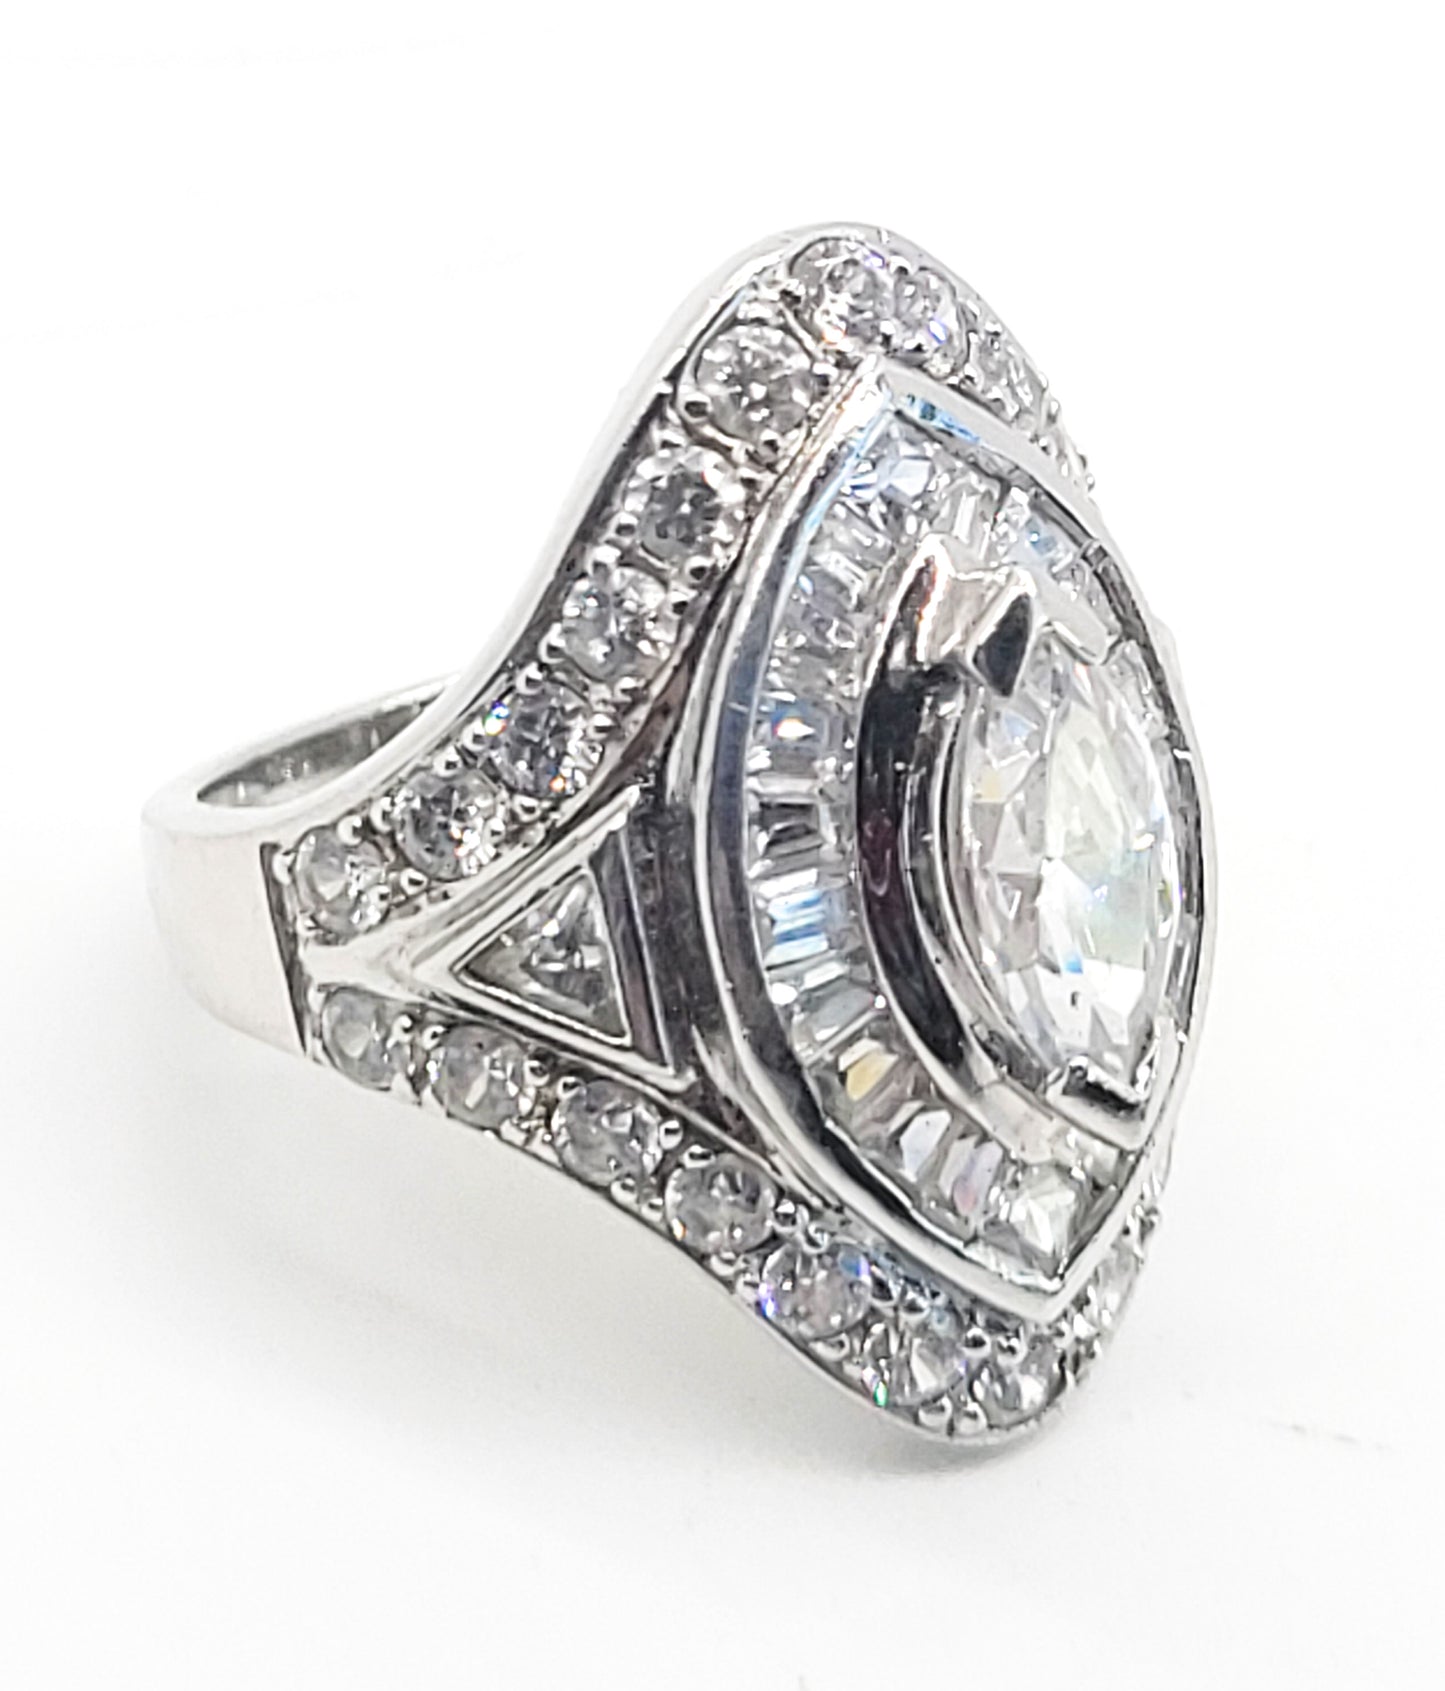 Charlie Lapson RETIRED Brilliante 3.02 DEW Simulated Diamond Marquise Ring size 6.5